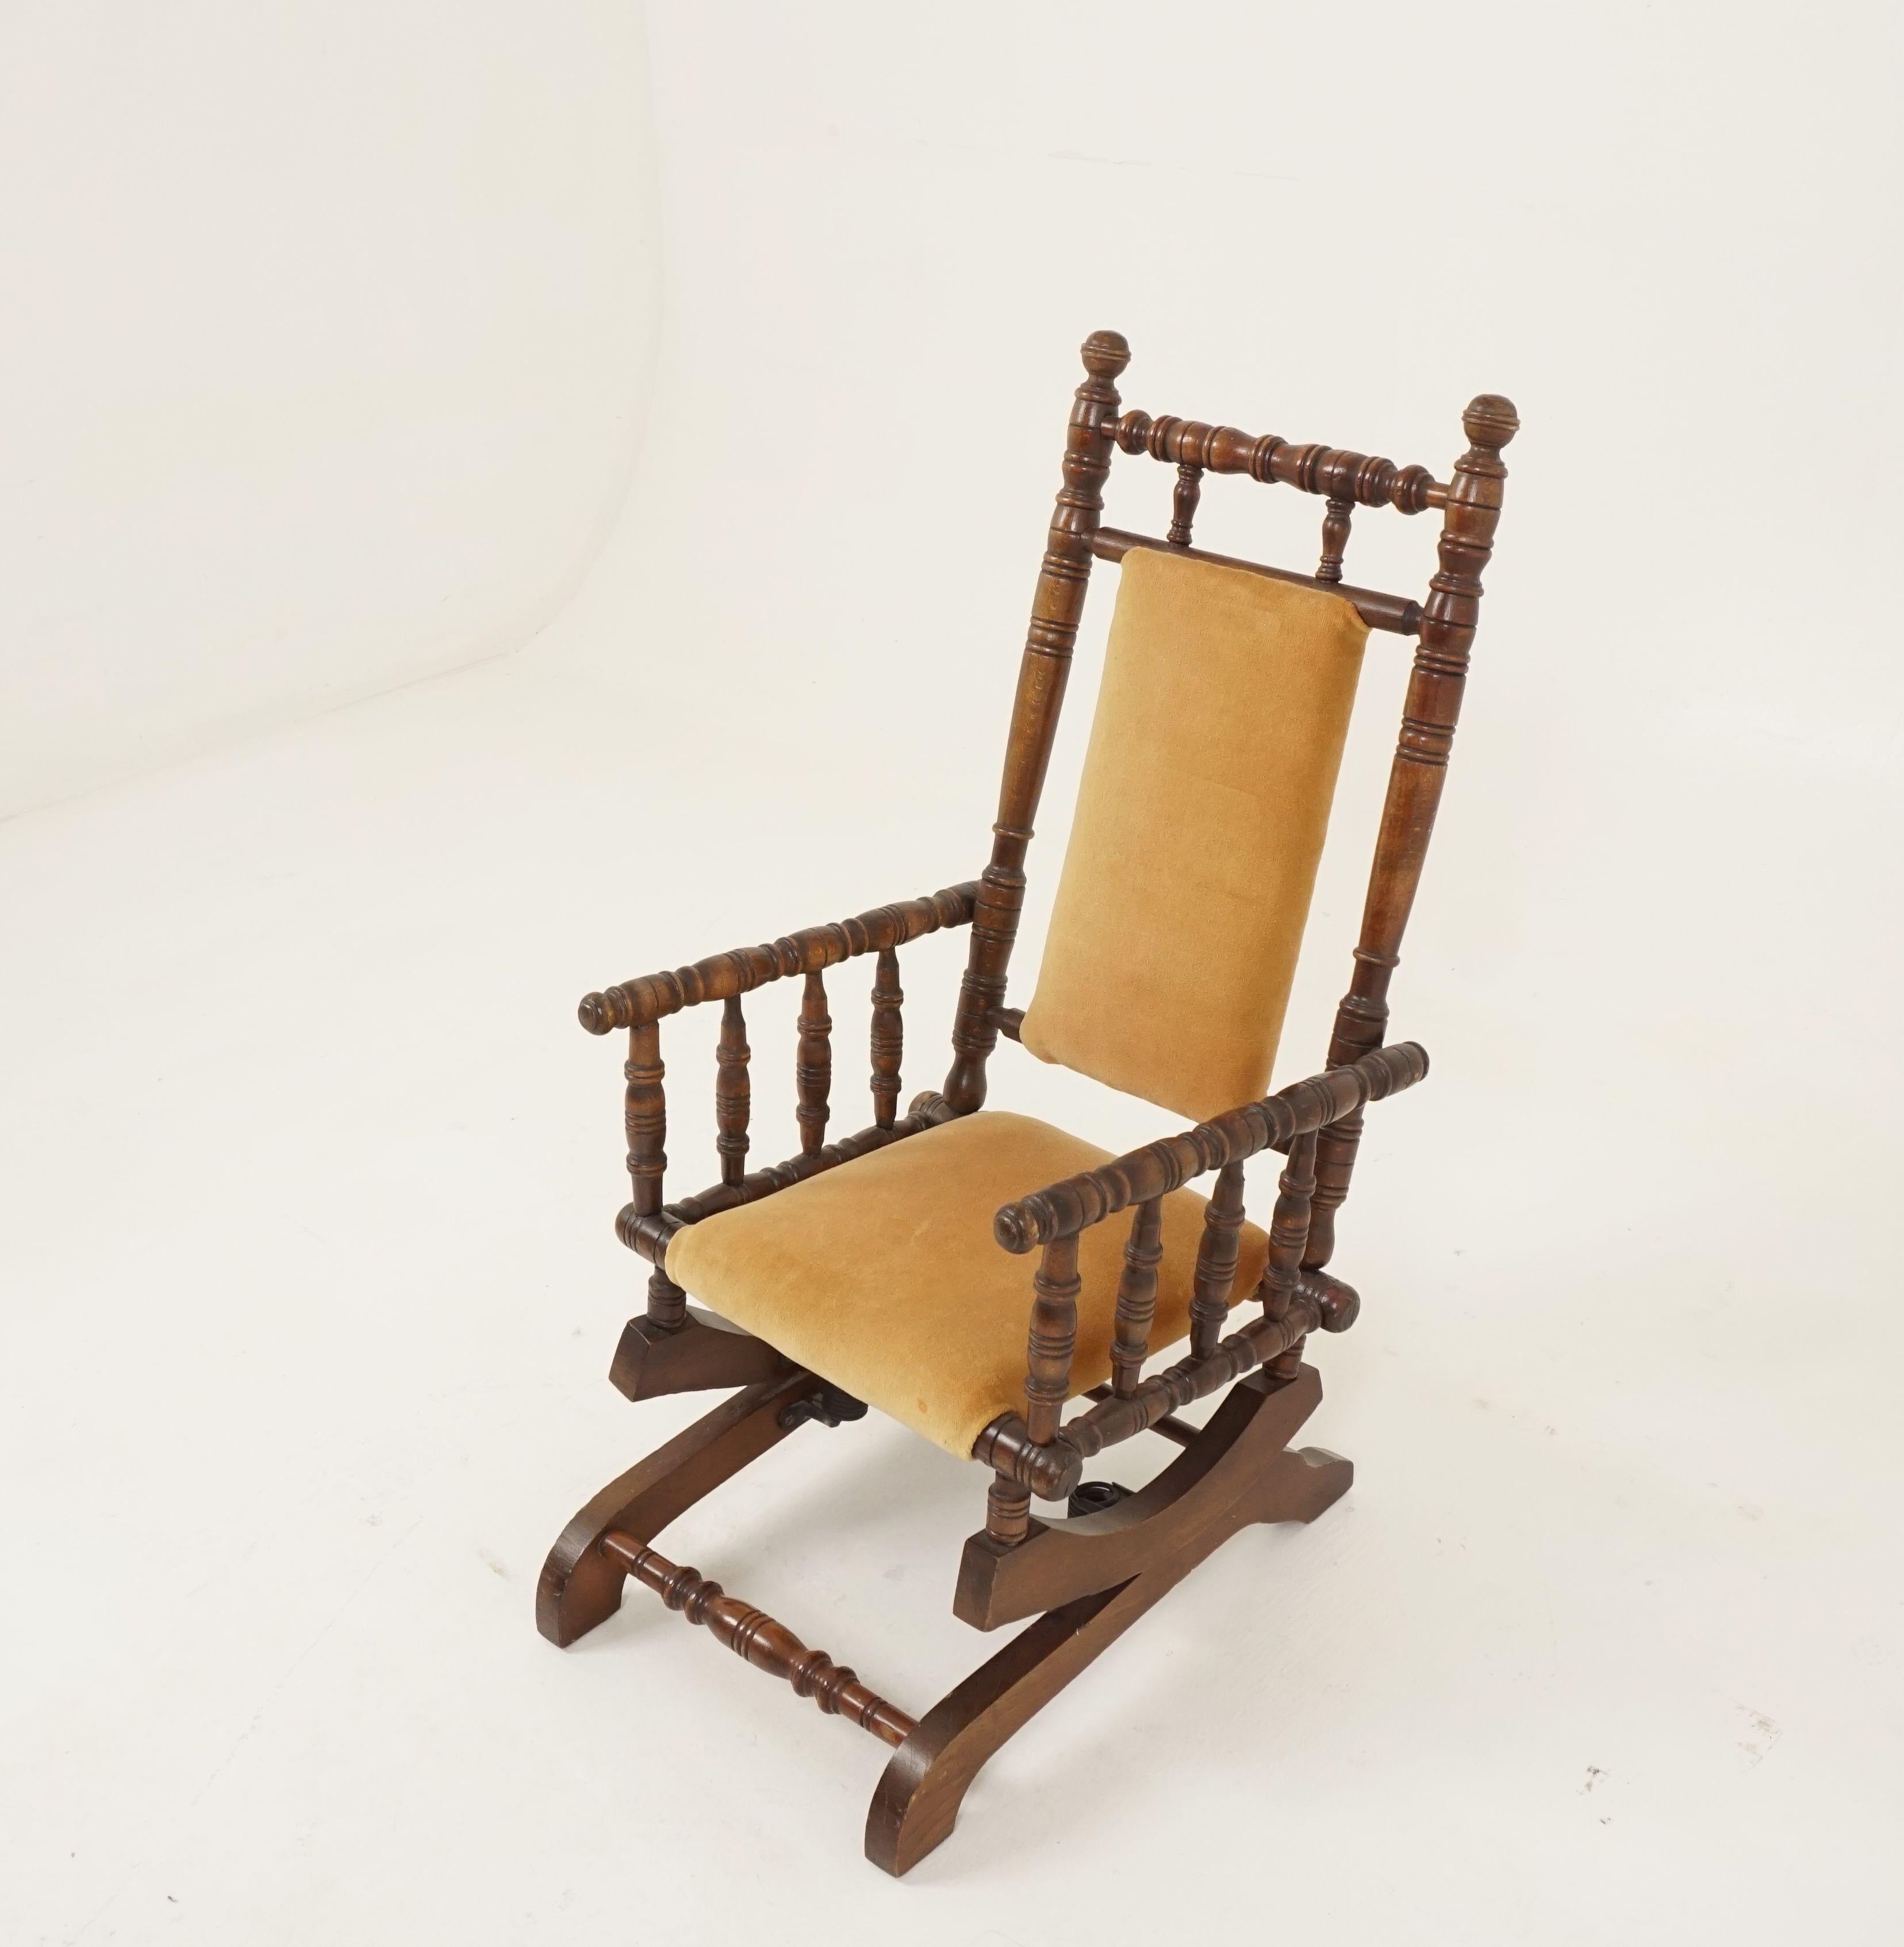 Antique rocking chair, childs chair, beechwood, American 1880, H582

American 1880
Solid beechwood
Original finish
Turned supports with finials on top
Velvet upholstered seat and back that has brass studded detail
The static platform base has a pair